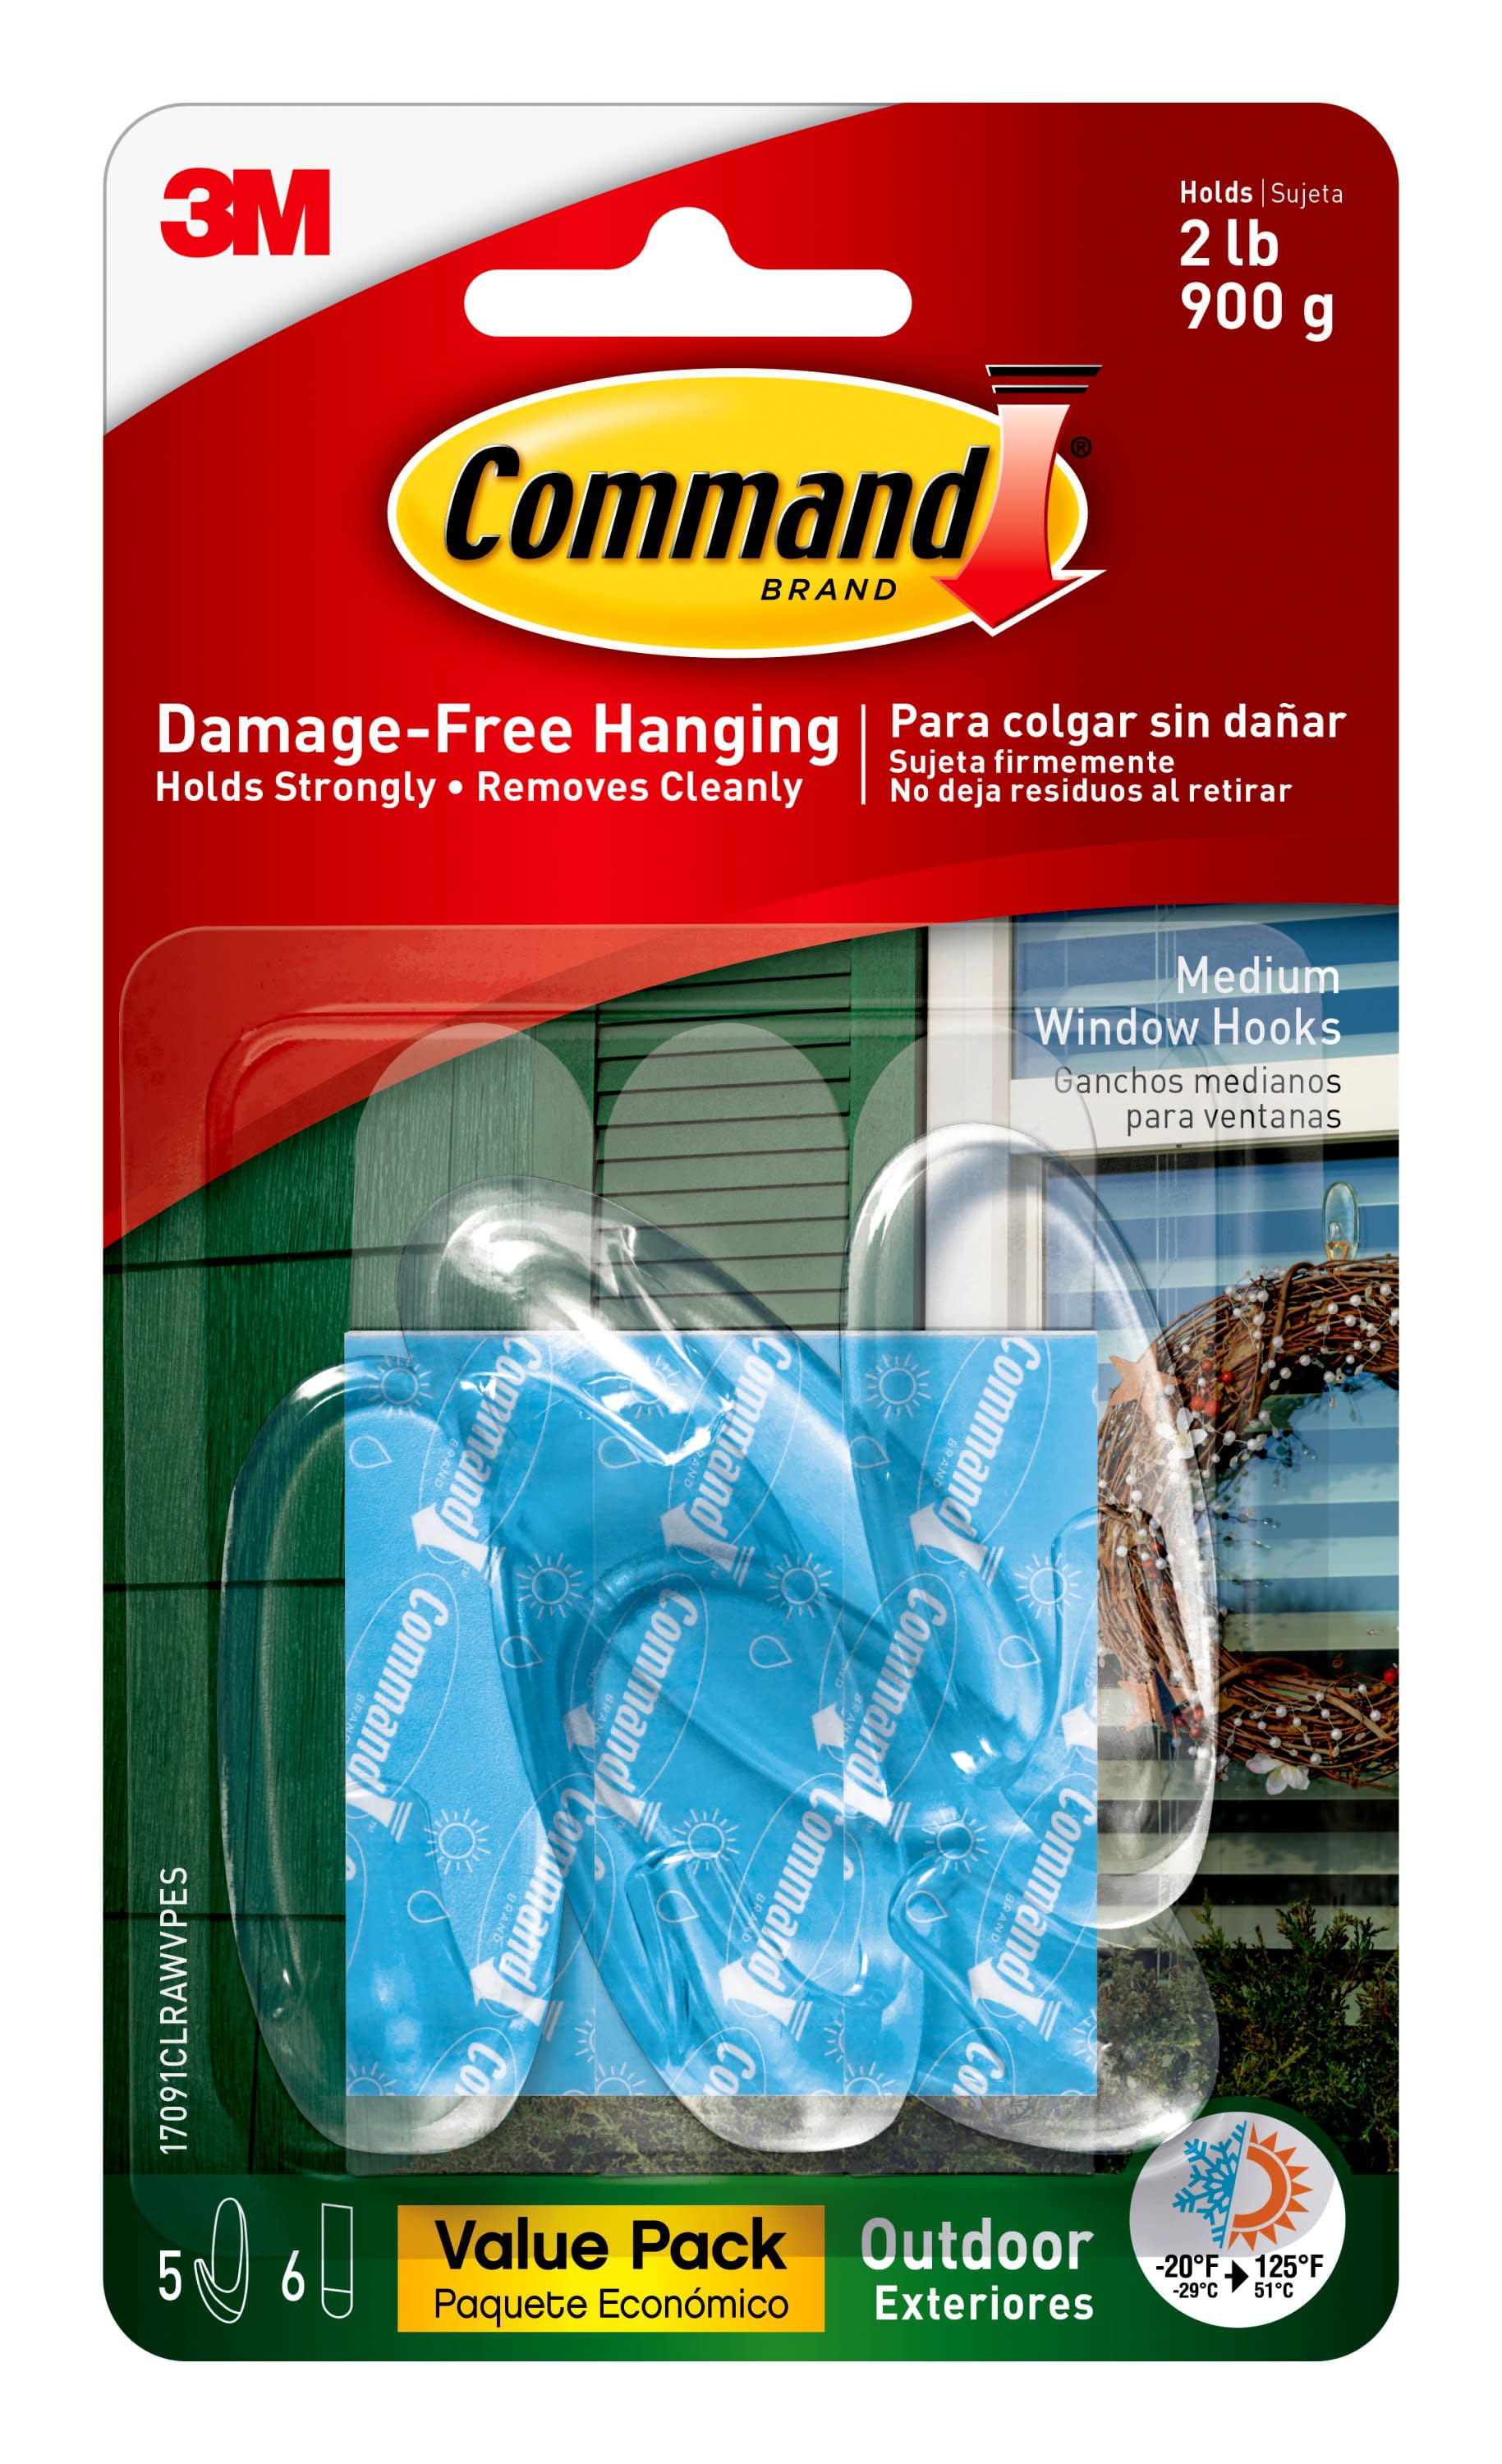 Command Strips Hooks for Lights  Indoor or Outdoor Use with 3M